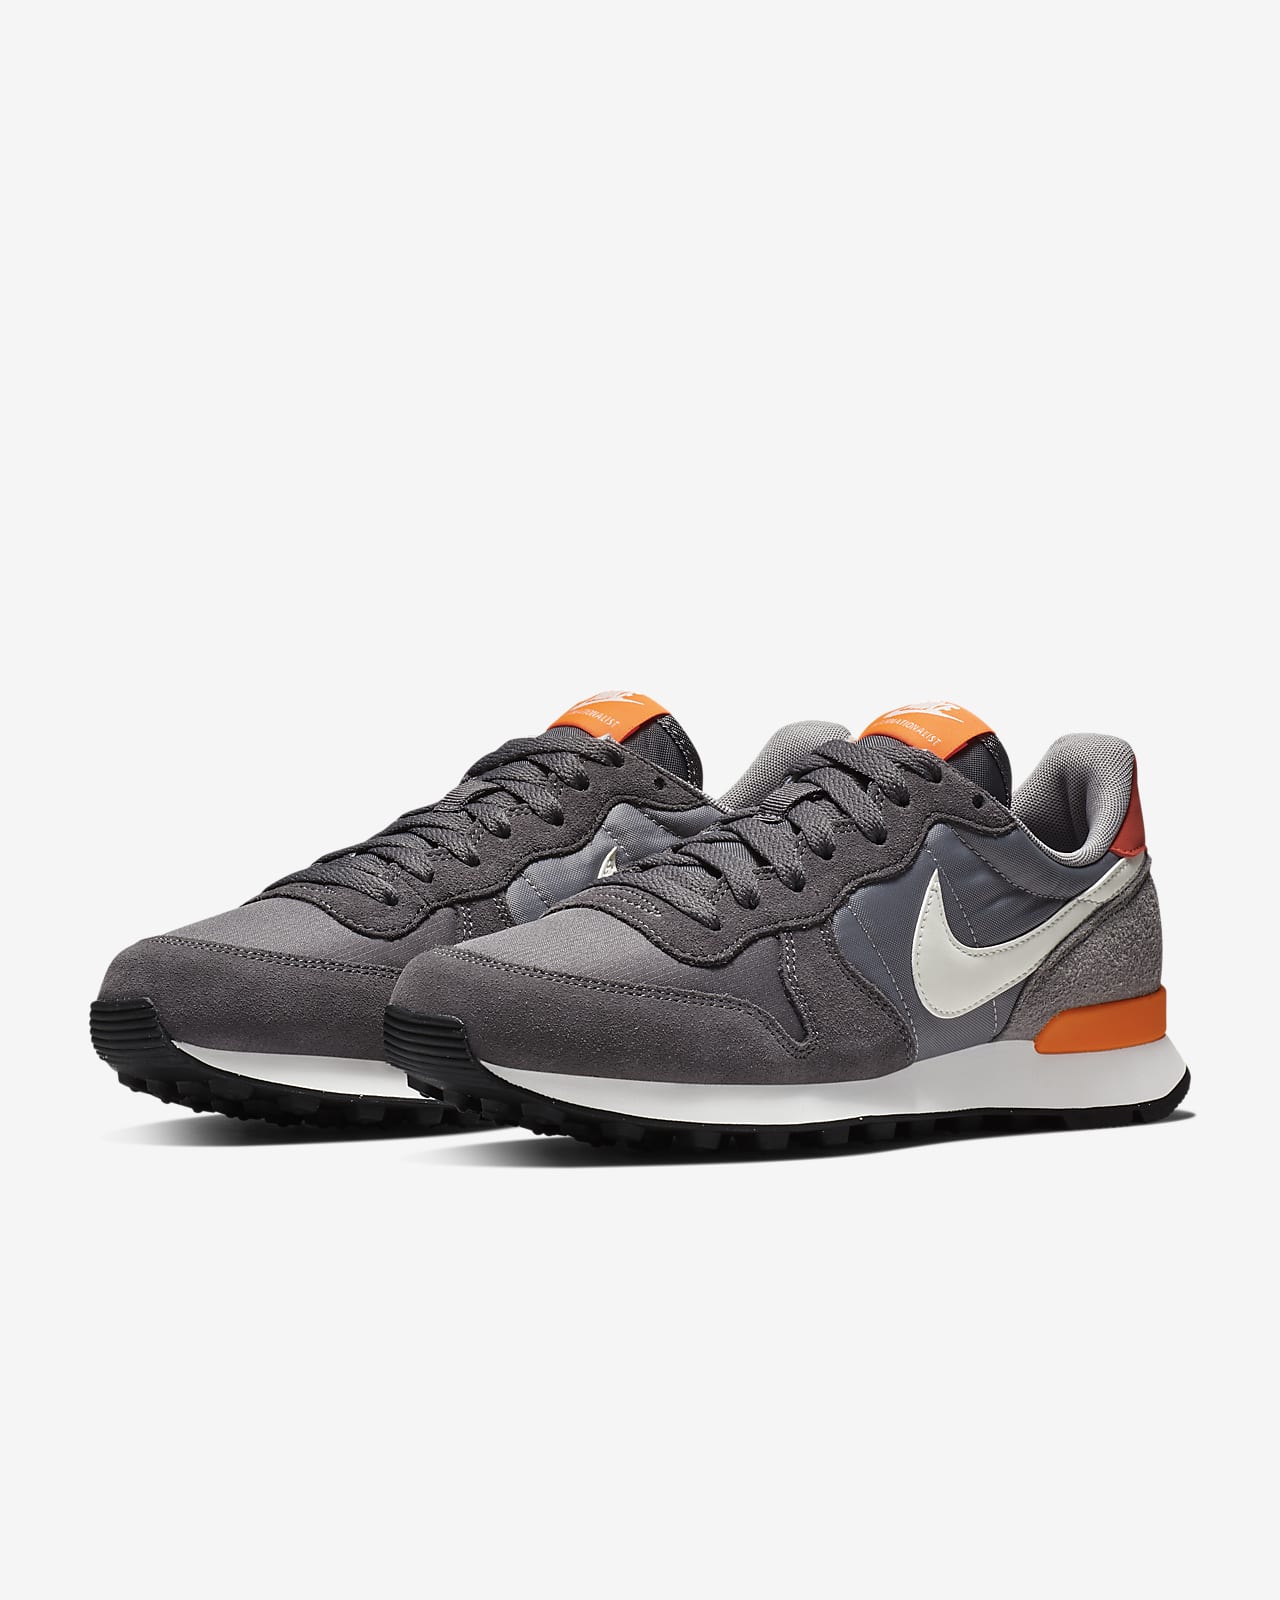 Talented Is crying divorce Nike Internationalist 2021 Norway, SAVE 46% - aveclumiere.com